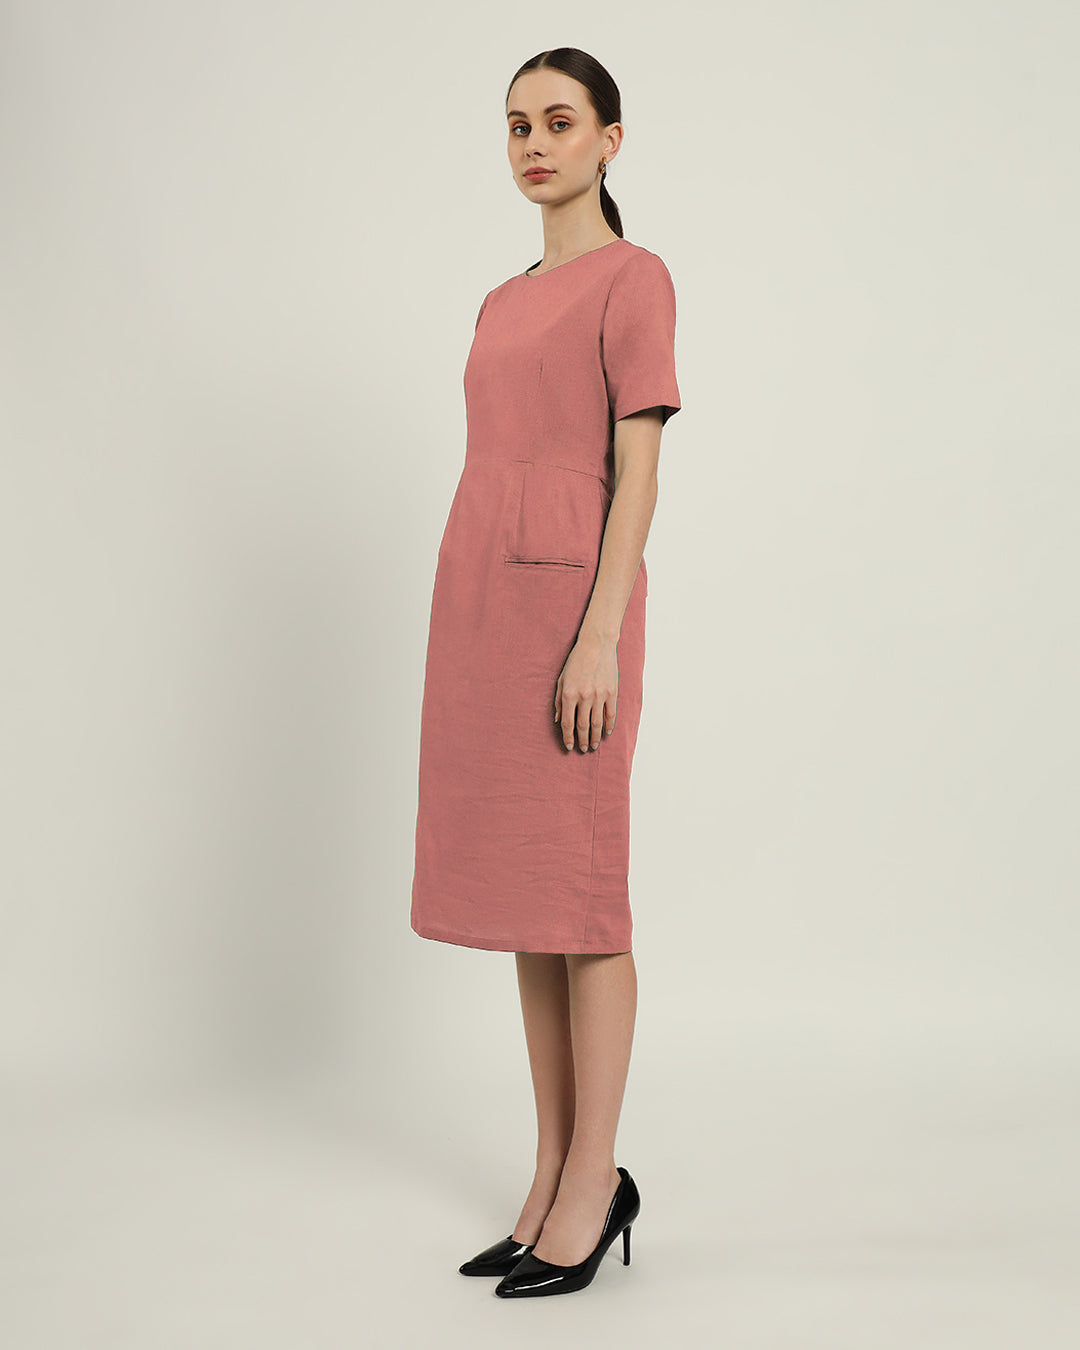 The Cairo Ivory Pink Dress